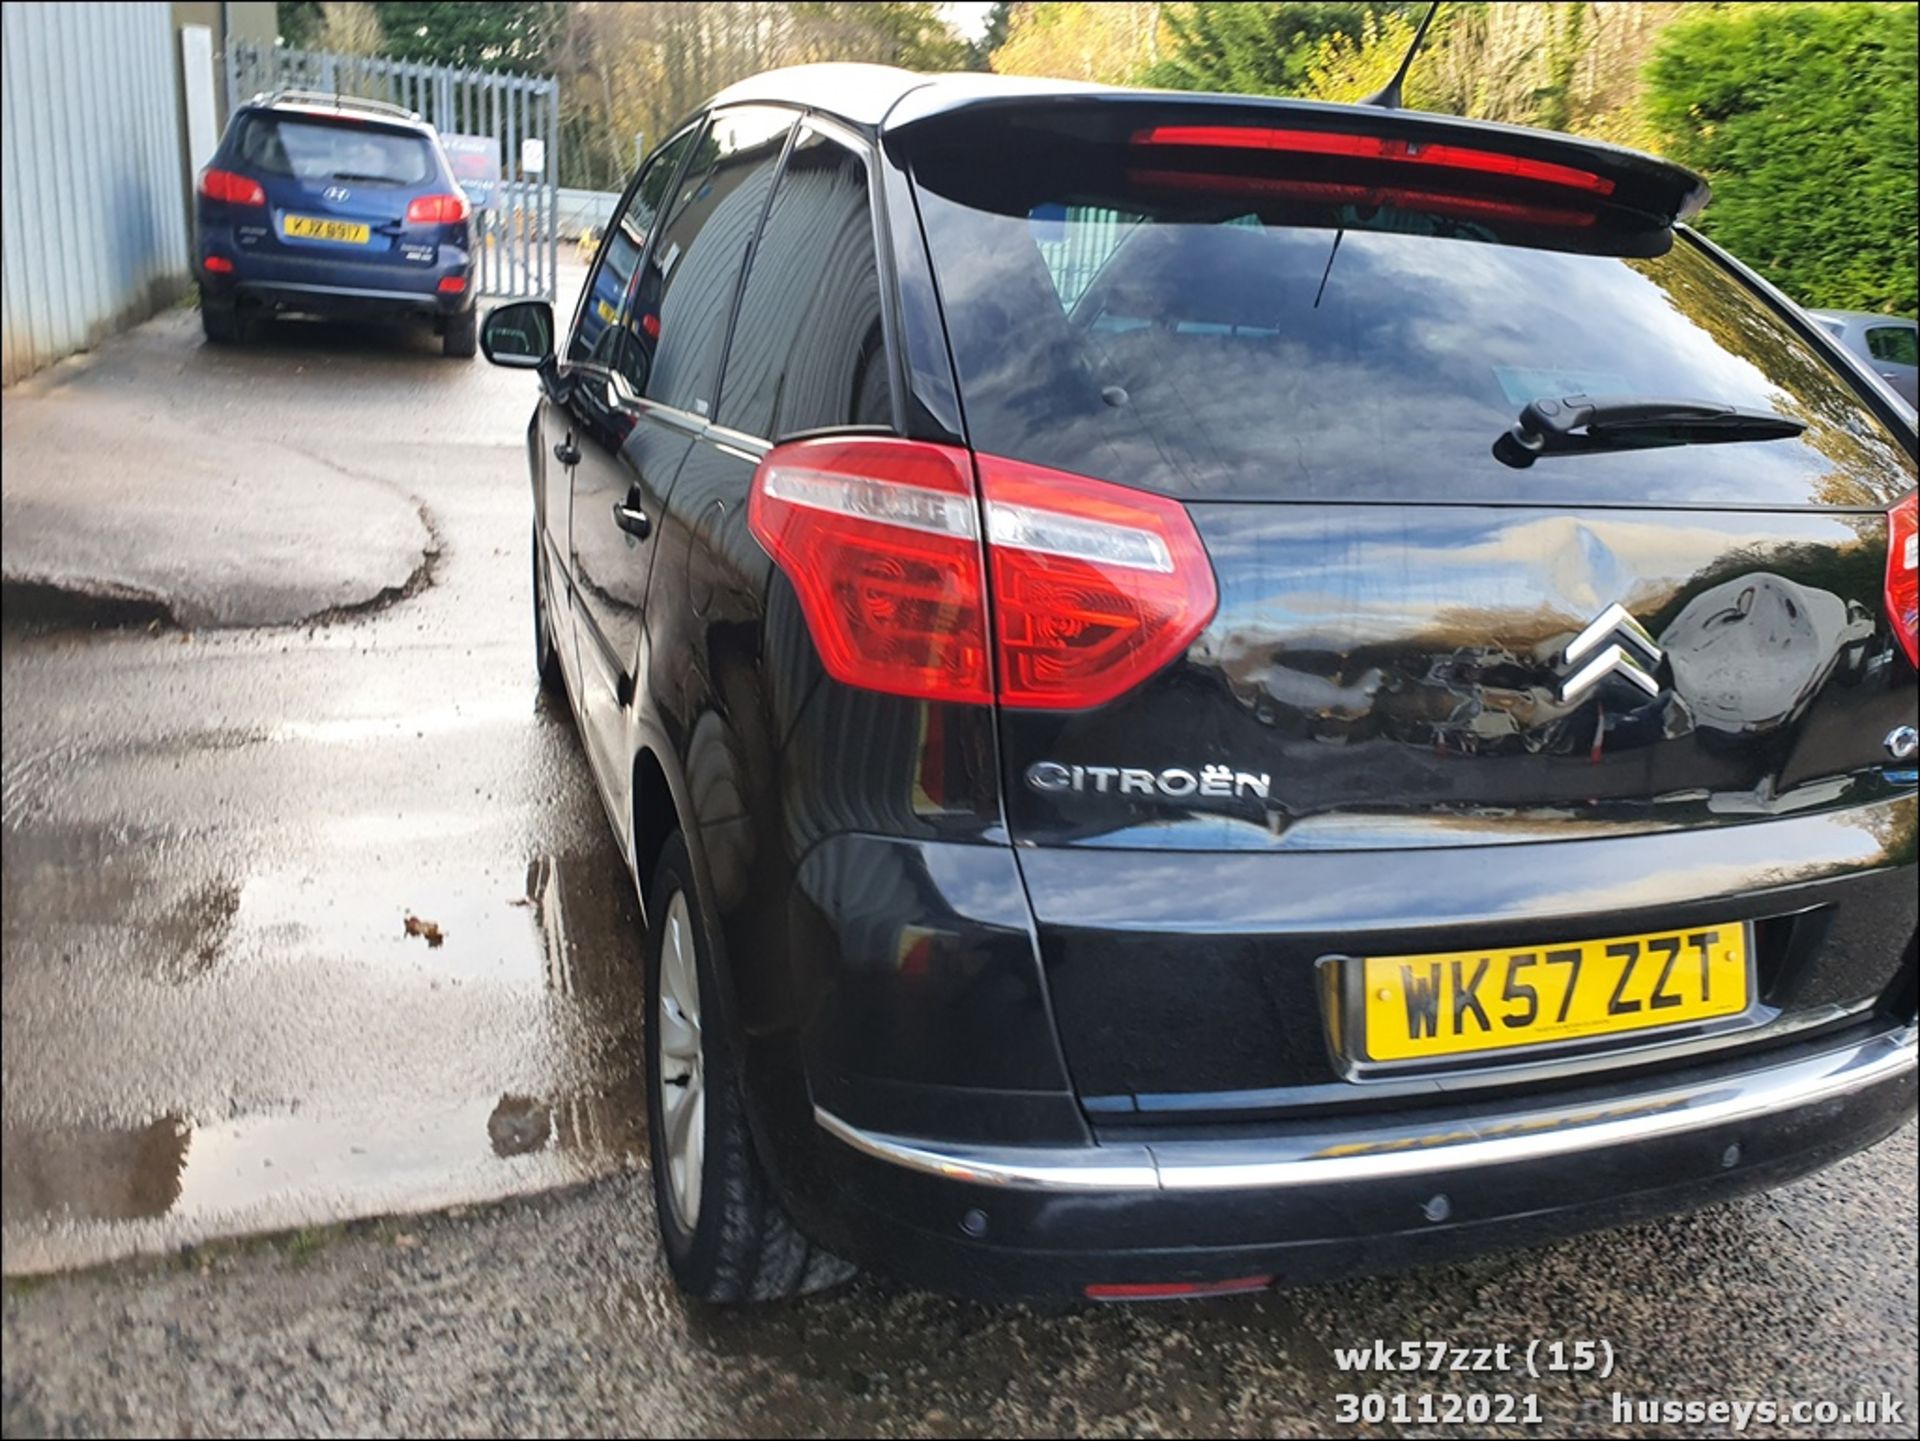 07/57 CITROEN C4 PICASSO 5 EXCL HDI EGS - 1560cc 5dr MPV (Black, 120k) - Image 15 of 29